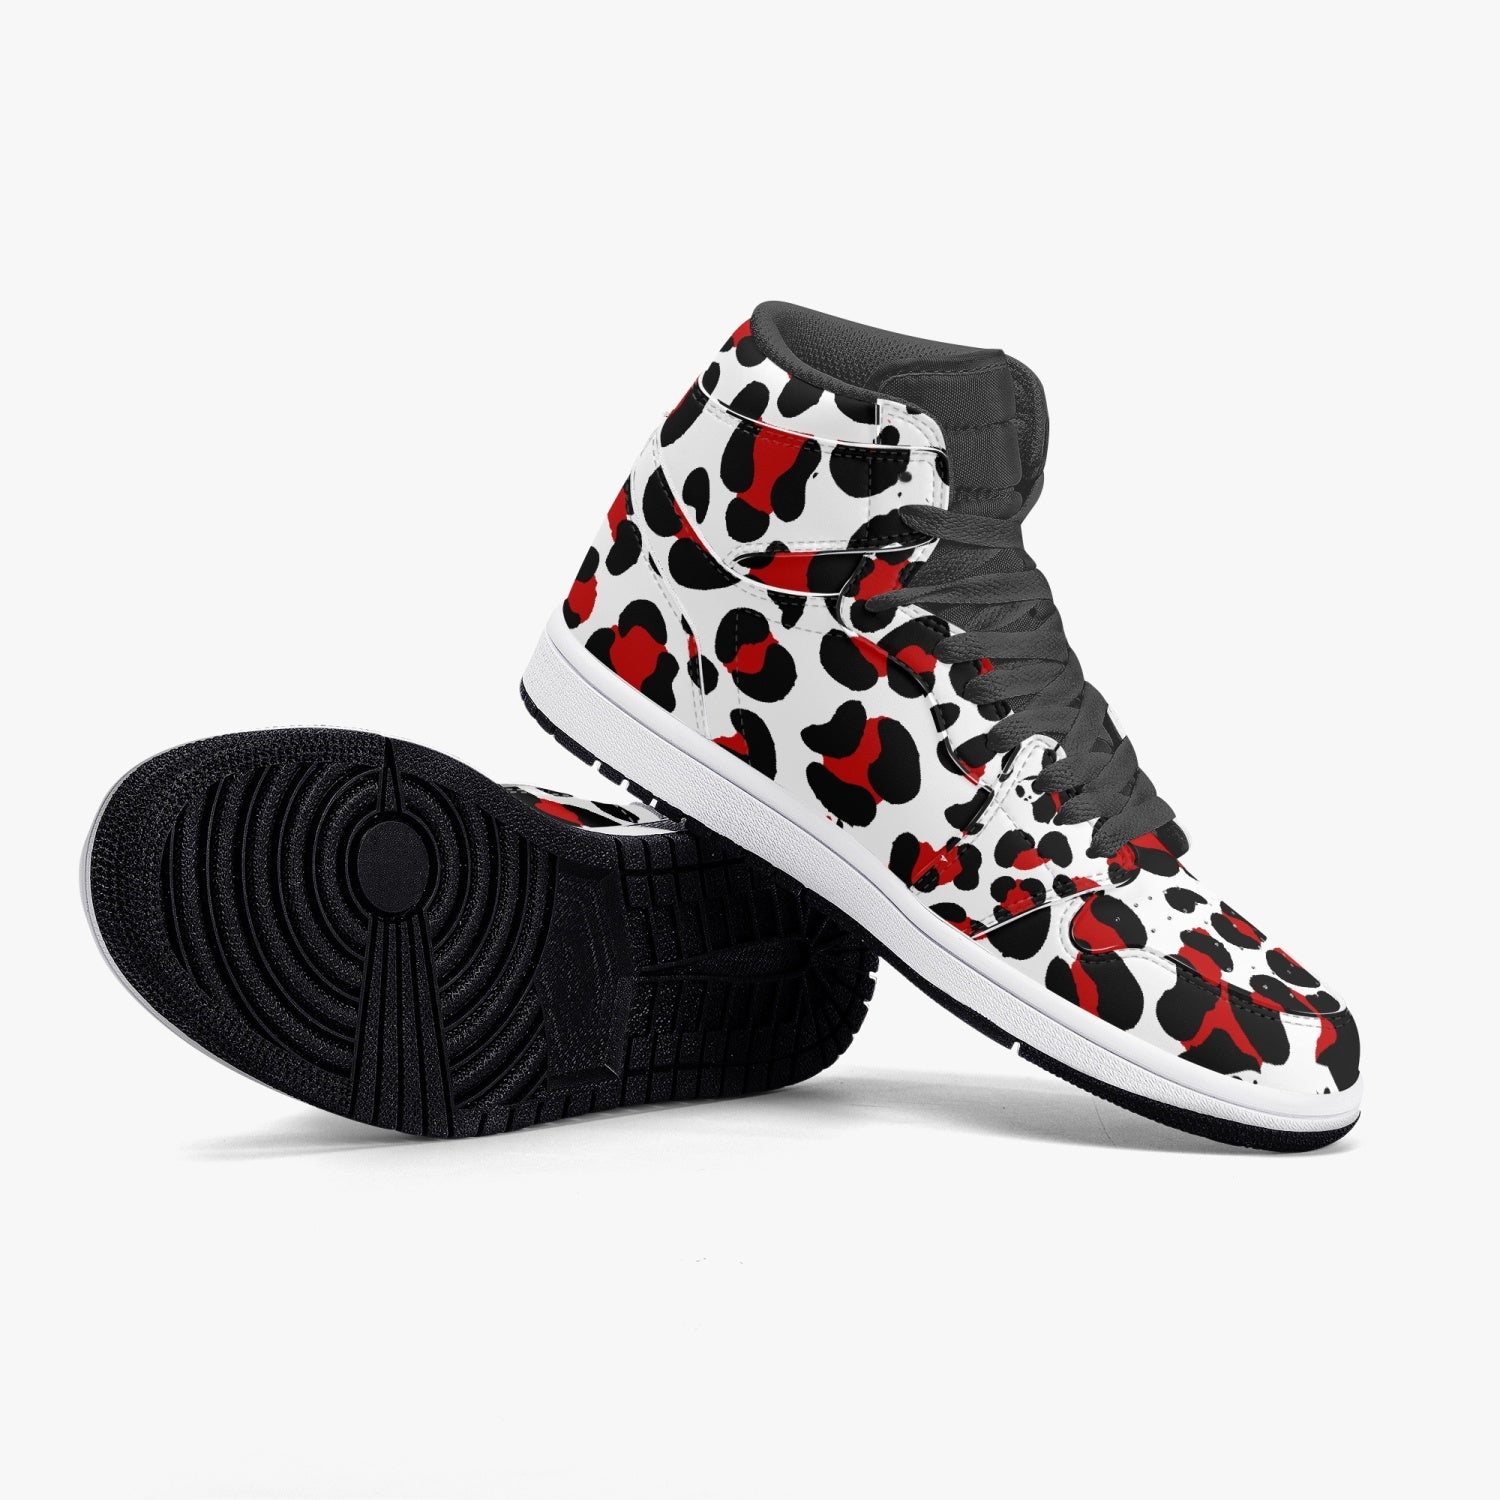 New Black & Red Leopard Print High-Top Leather Shoes